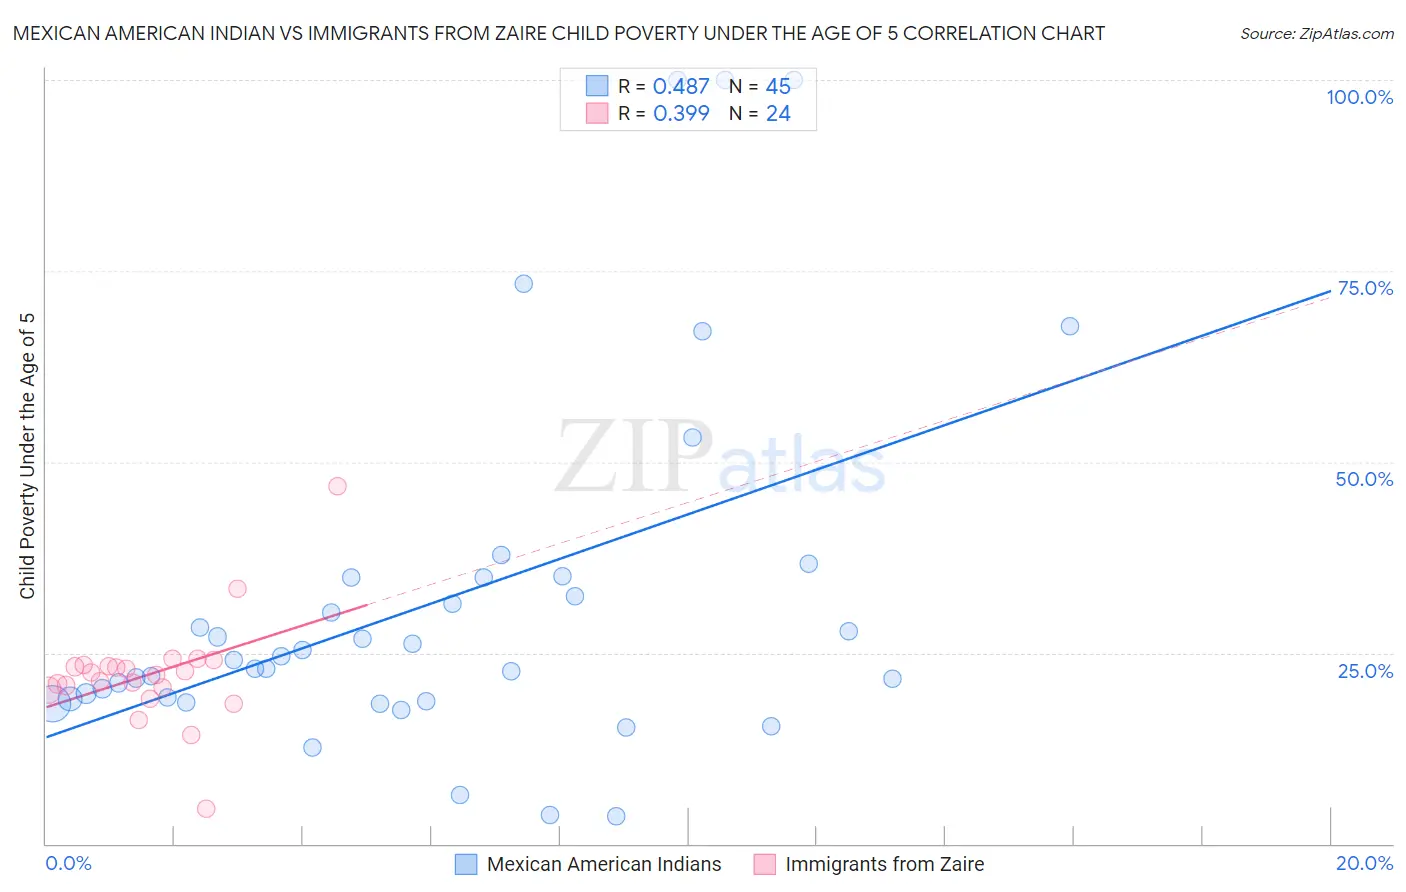 Mexican American Indian vs Immigrants from Zaire Child Poverty Under the Age of 5